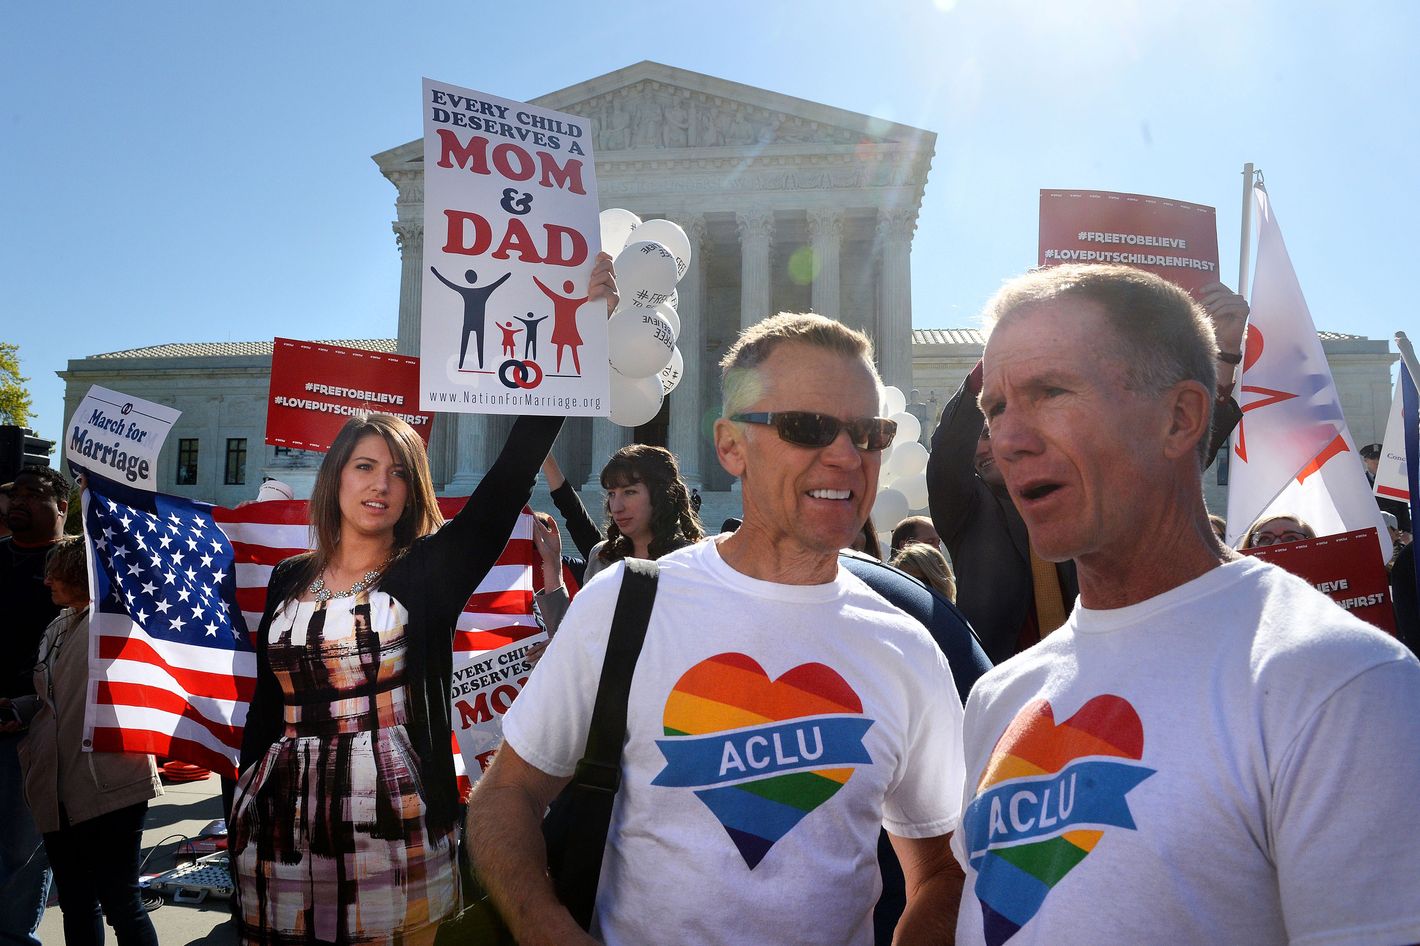 Both Sides of the Same-Sex Marriage Case Duel With Signs and Slogans  Outside the Supreme Court